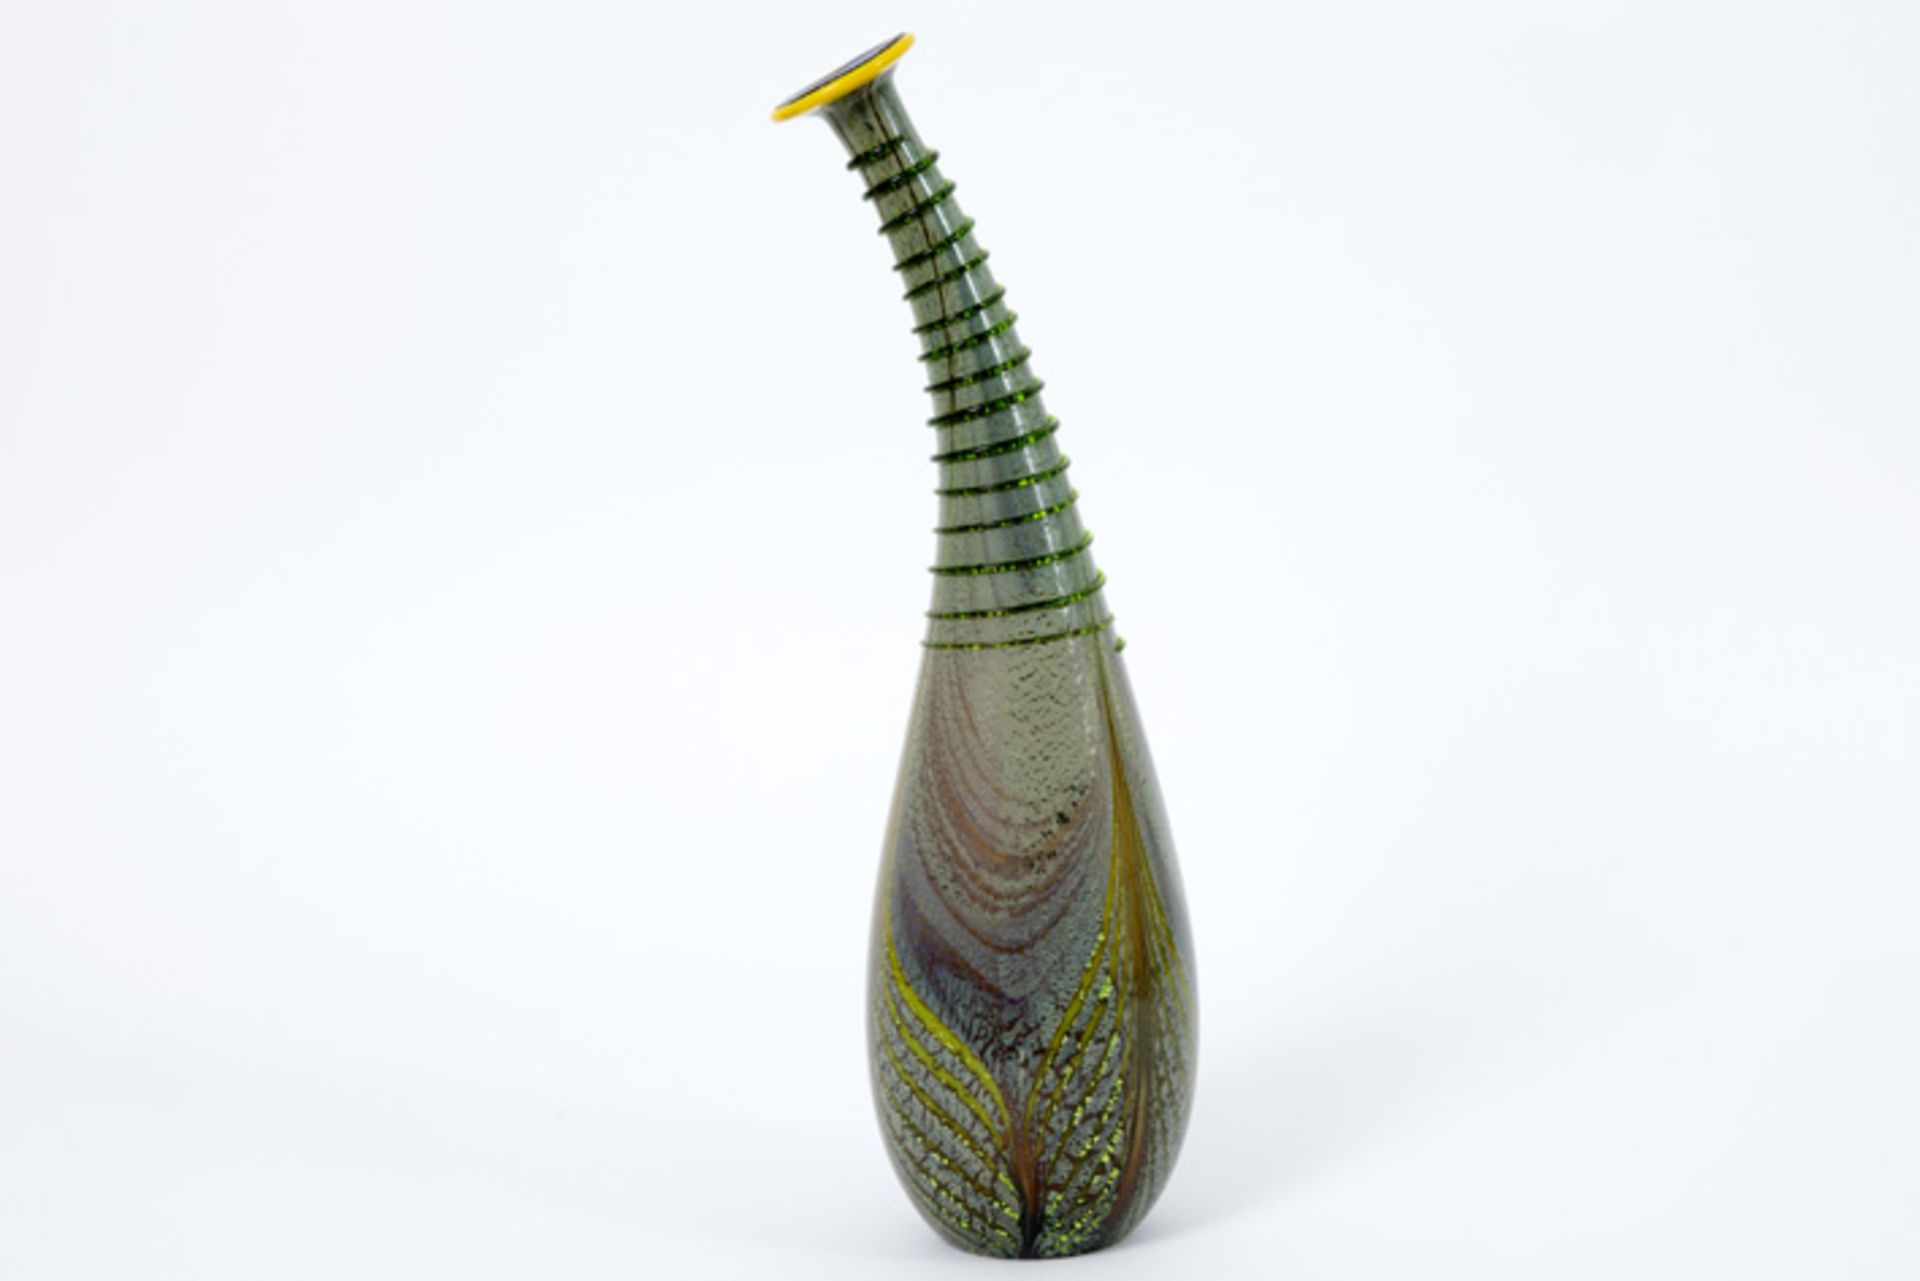 an early fifties' "reazione policroma" vase in opaline glass with iridiscent surface and with a